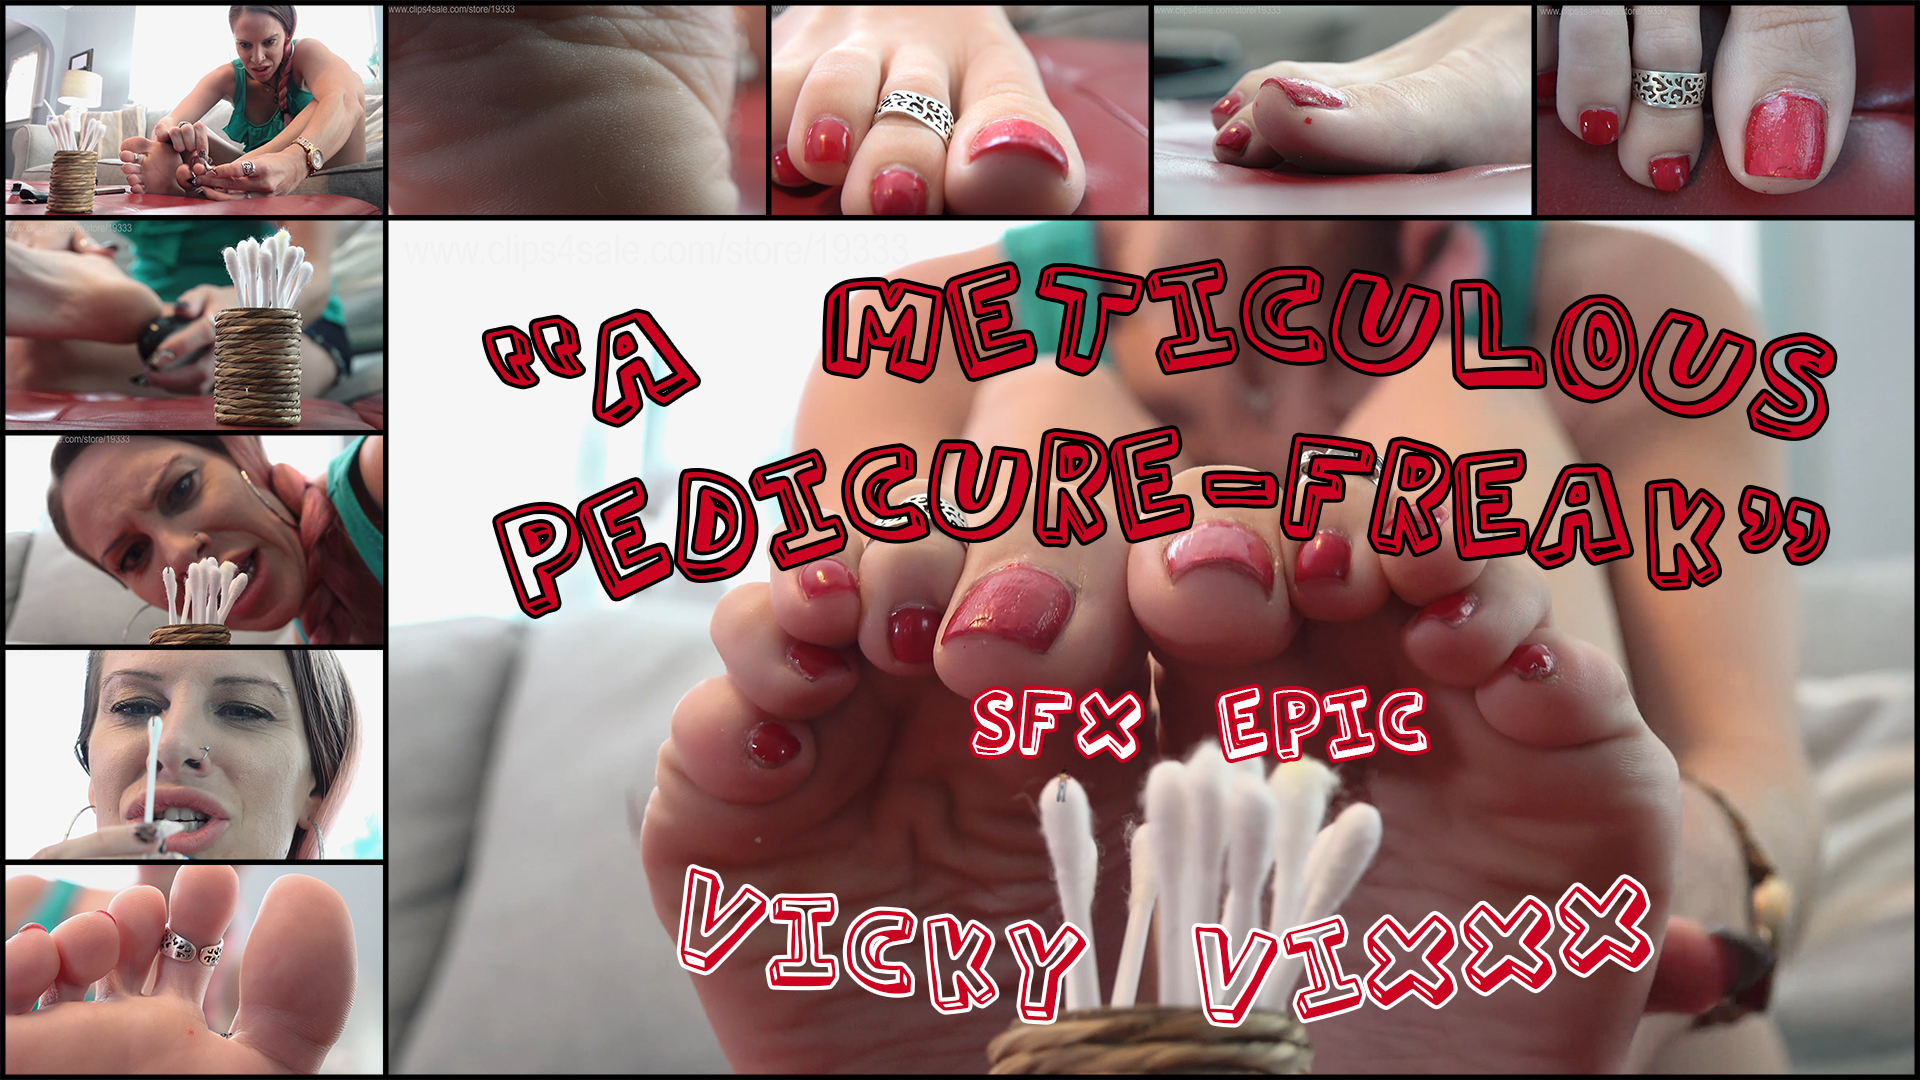 Ever since she dated a true foot-freak, Vicky Vixxx couldn't help but become one herself. she got rid of him, but the obsession about keeping her feet and toes in flawless shape stuck around.
<br><br>
As Vicky takes care of her pedicure, rumbling to herself about what a pedicure freak she became, she has no idea that her perverted Ex is watching her! he was so obsessed with her and with her feet, that he used his knowledge in chemistry and actually SHRUNK himself down to the size of a bug! this way, he thought he could creep close to the object of his desire without getting caught.
<br><br>
Alas...Vicky eventually notices him, and after the initial shock fades off, she decides to give him exactly what he wished for!
<br><br>
Yet another Epic SFX video from my INSANE Florida shooting spree. feet, toes,unaware-into-aware and micro lovers - this one is for you! Vicky Vixxx is just perfect!
<br><br>
Unaware giantess
<br><br>
pov
<br><br>
toes/toenails close-ups
<br><br>
special effects
<br><br>
Micro-shrink
<br><br>
foot fetish/feet/toes close-ups
<br><br>
pov
<br><br>
size comparisons